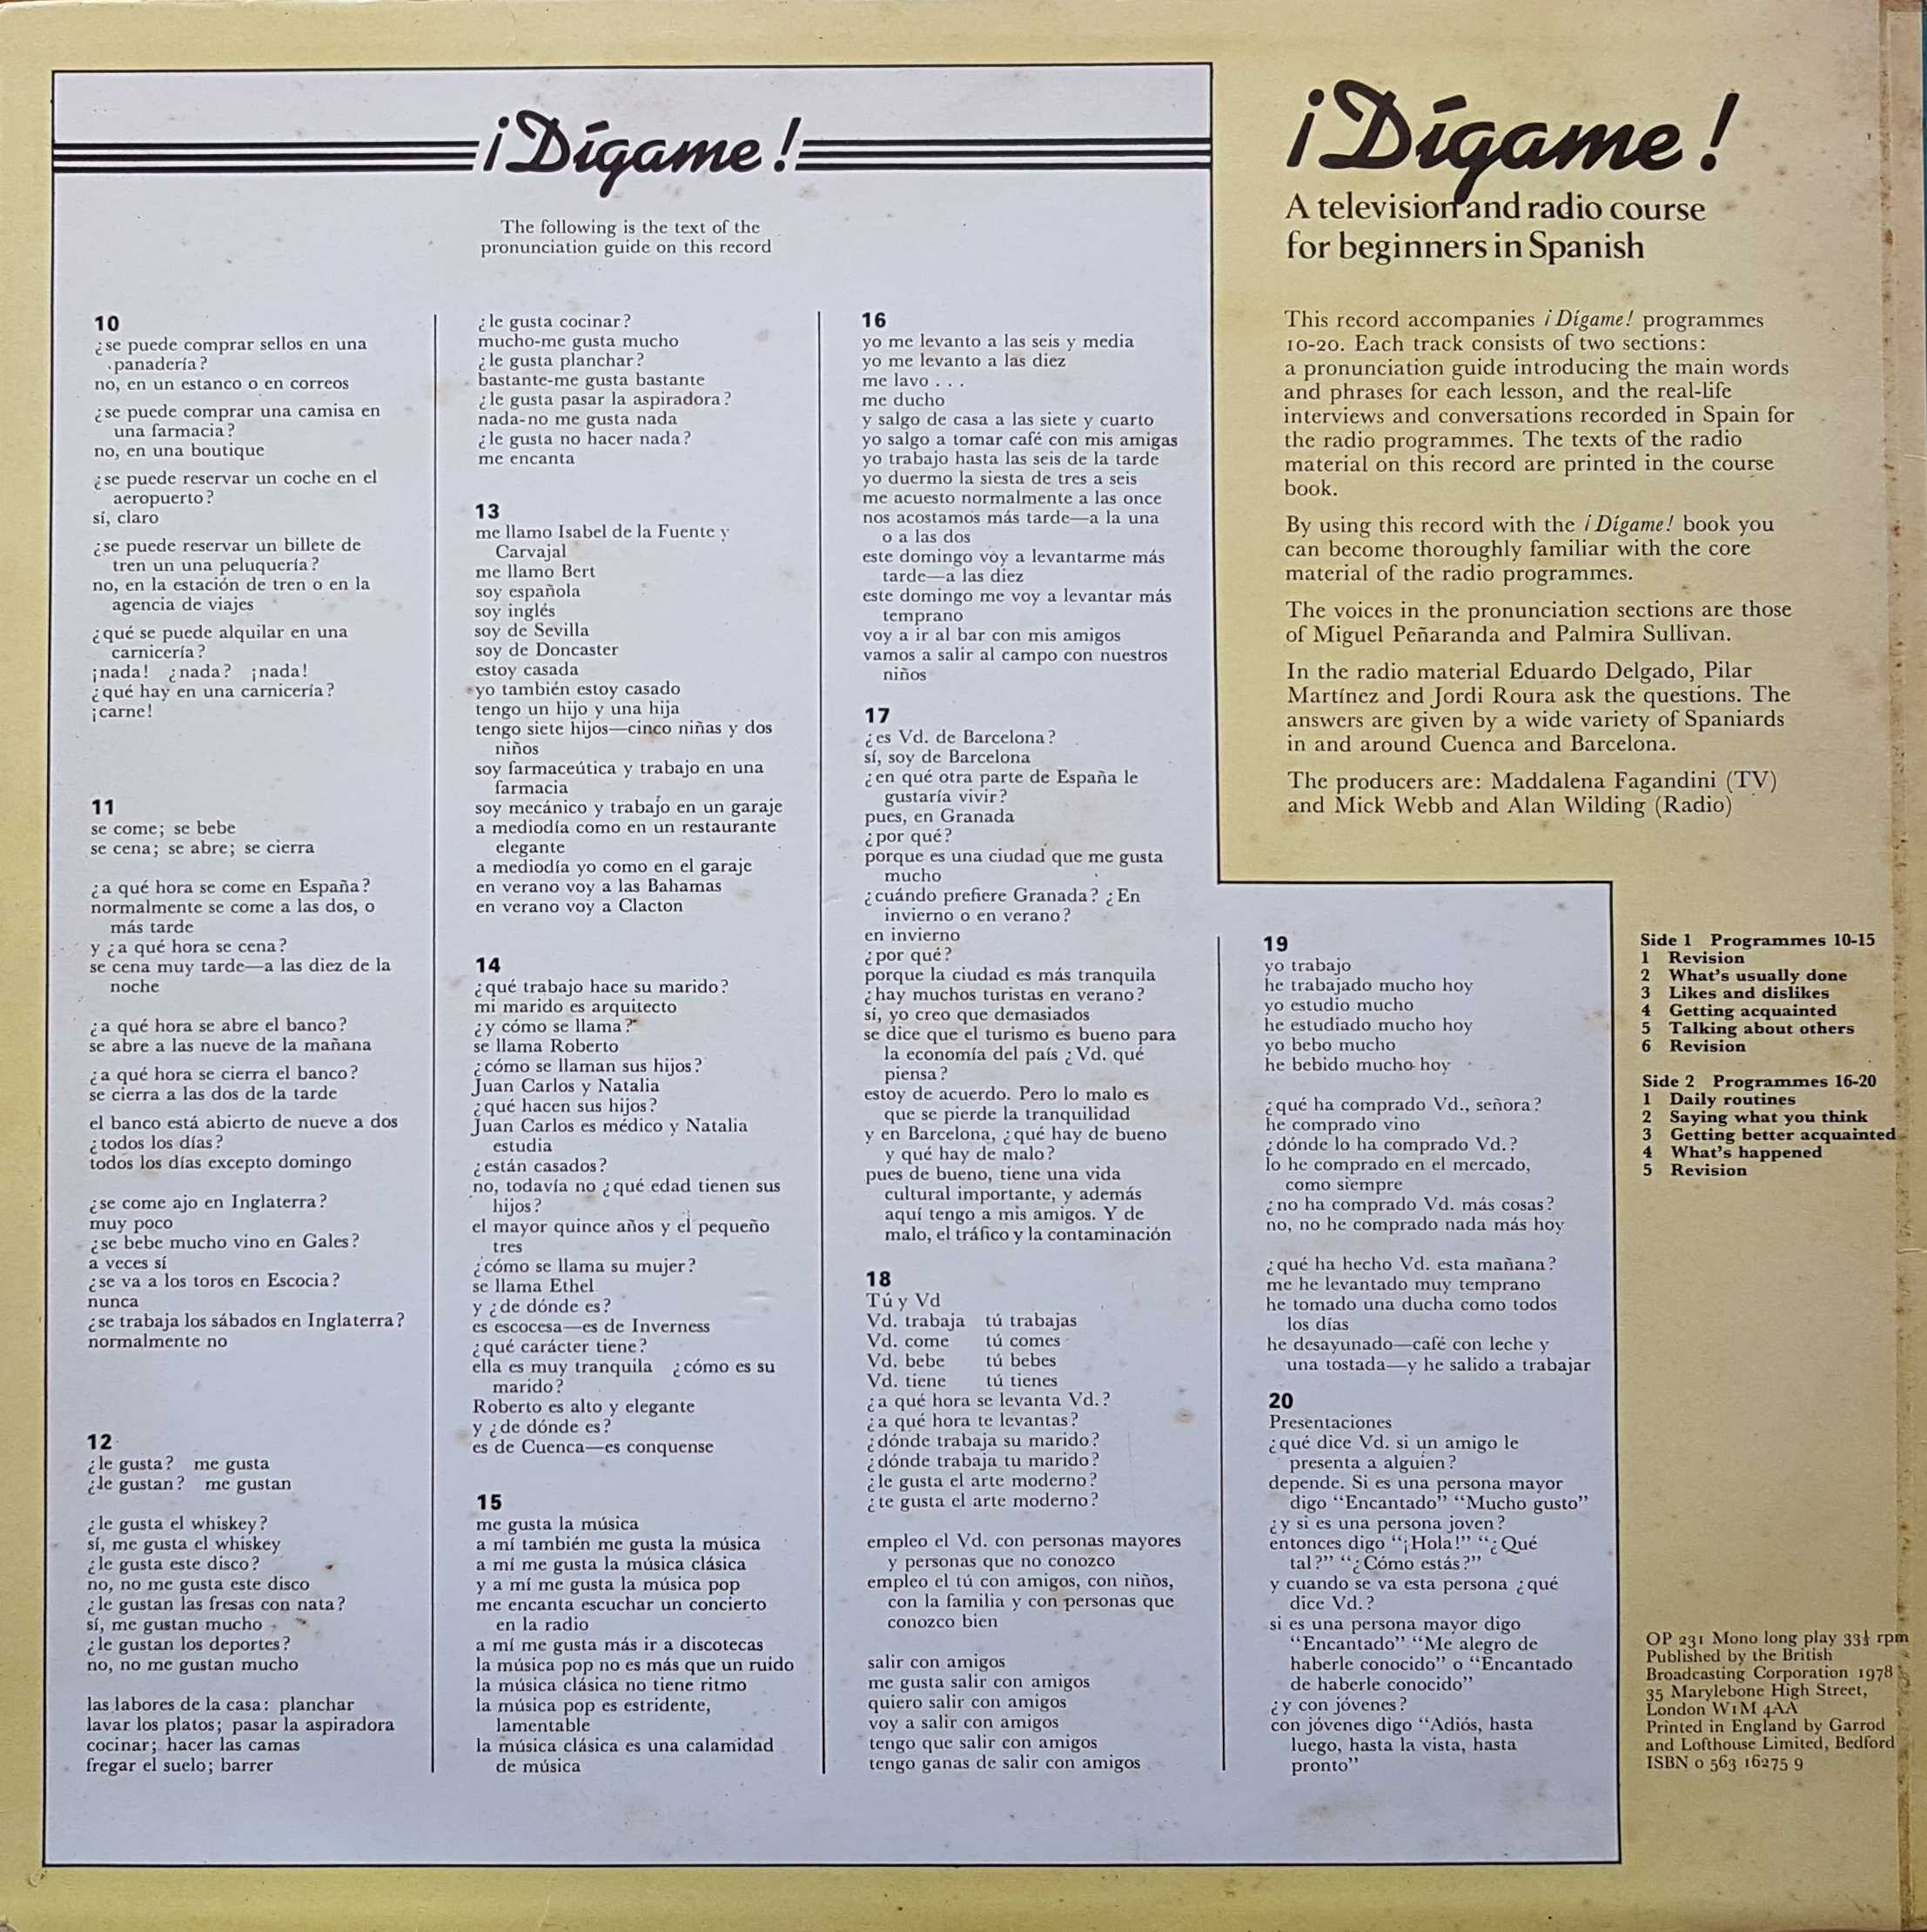 Picture of OP 231 Digame ! 2 - A television and radio course for beginners in Spanish - Programmes 10 - 20 by artist Various from the BBC records and Tapes library